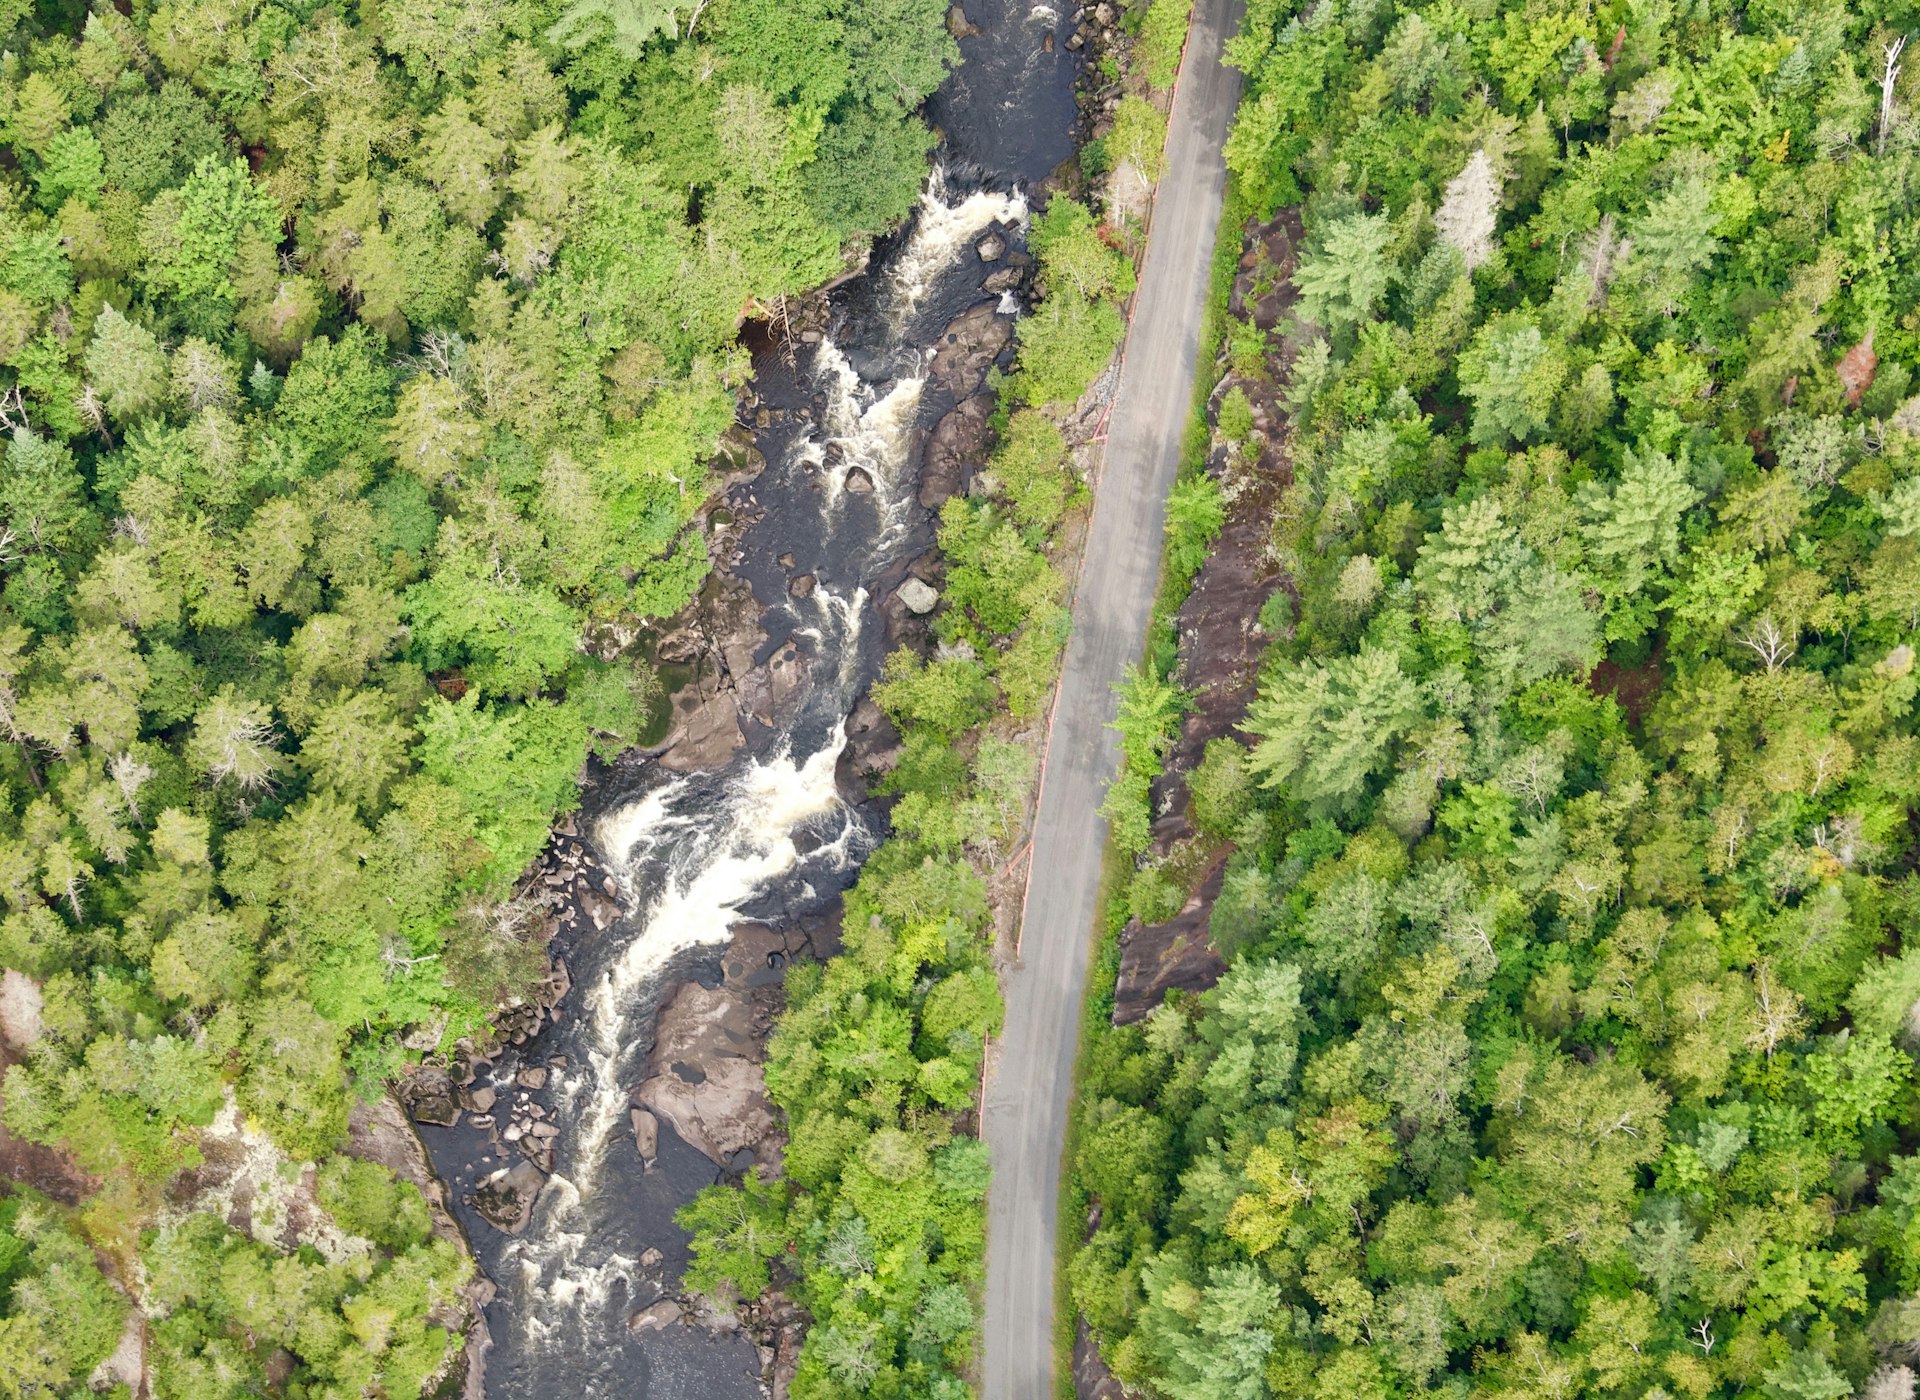 An aerial shot of a bike path running alongside a fast-flowing river surrounded by woodland